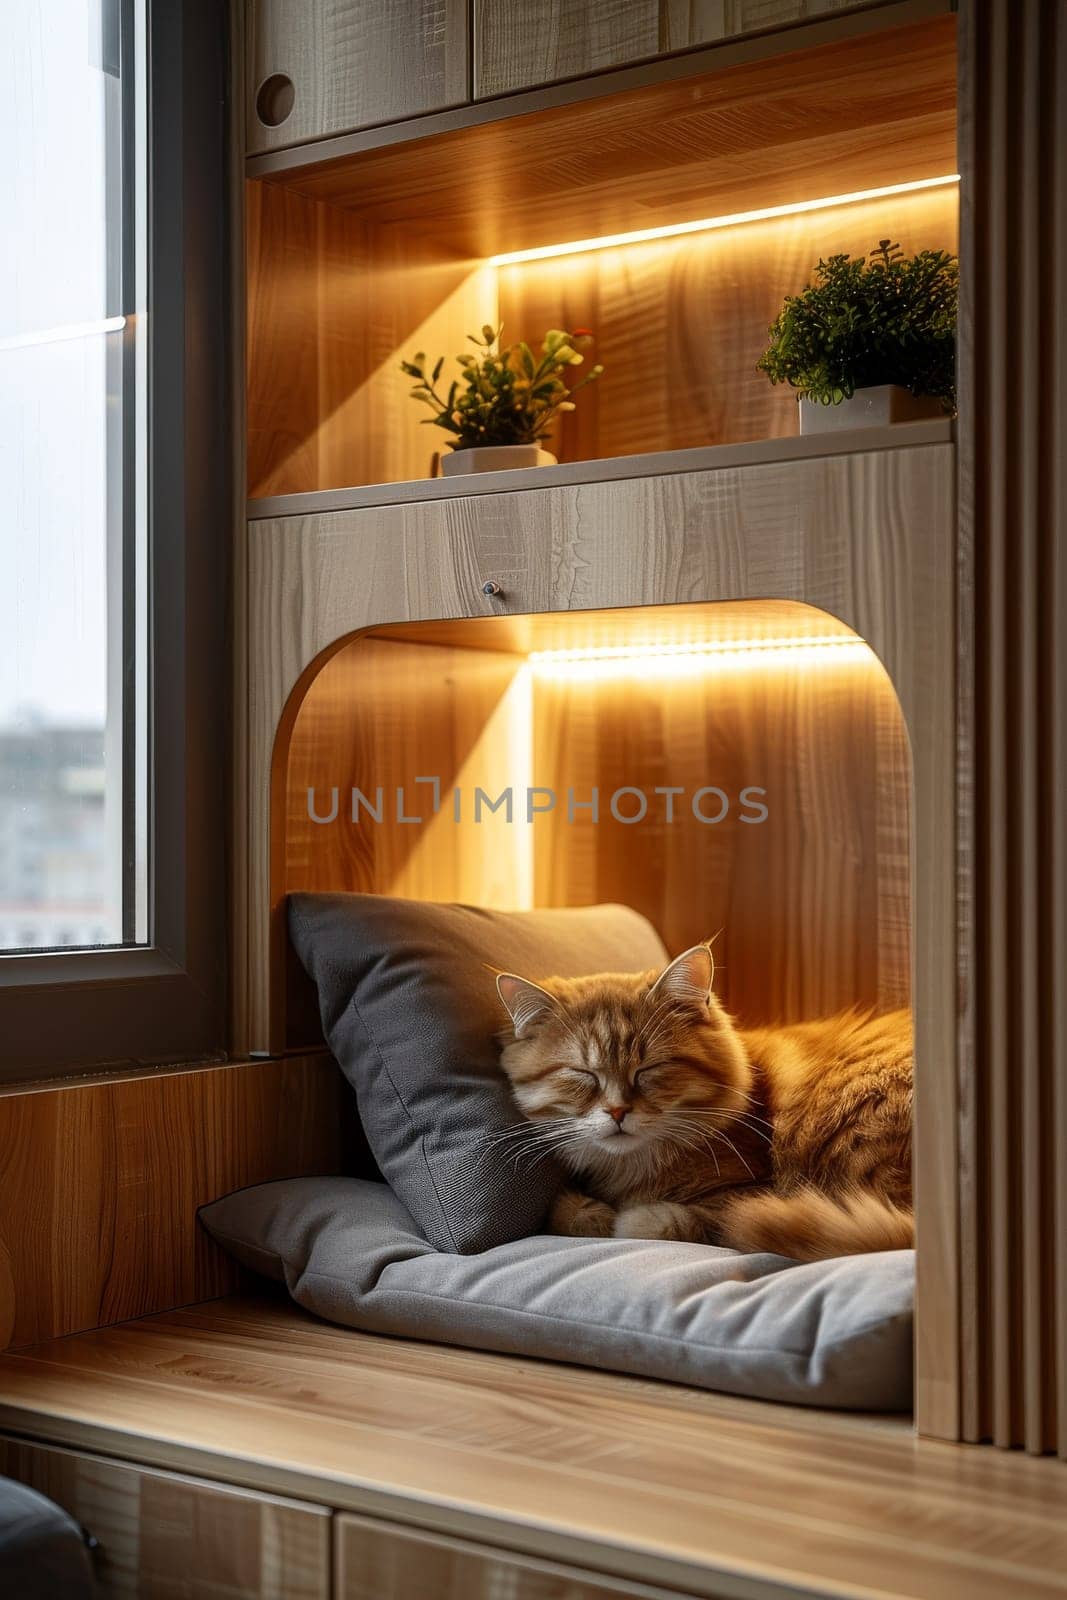 A cat is sleeping in a wooden bench with a pillow. The bench is lit up with lights, creating a cozy and warm atmosphere